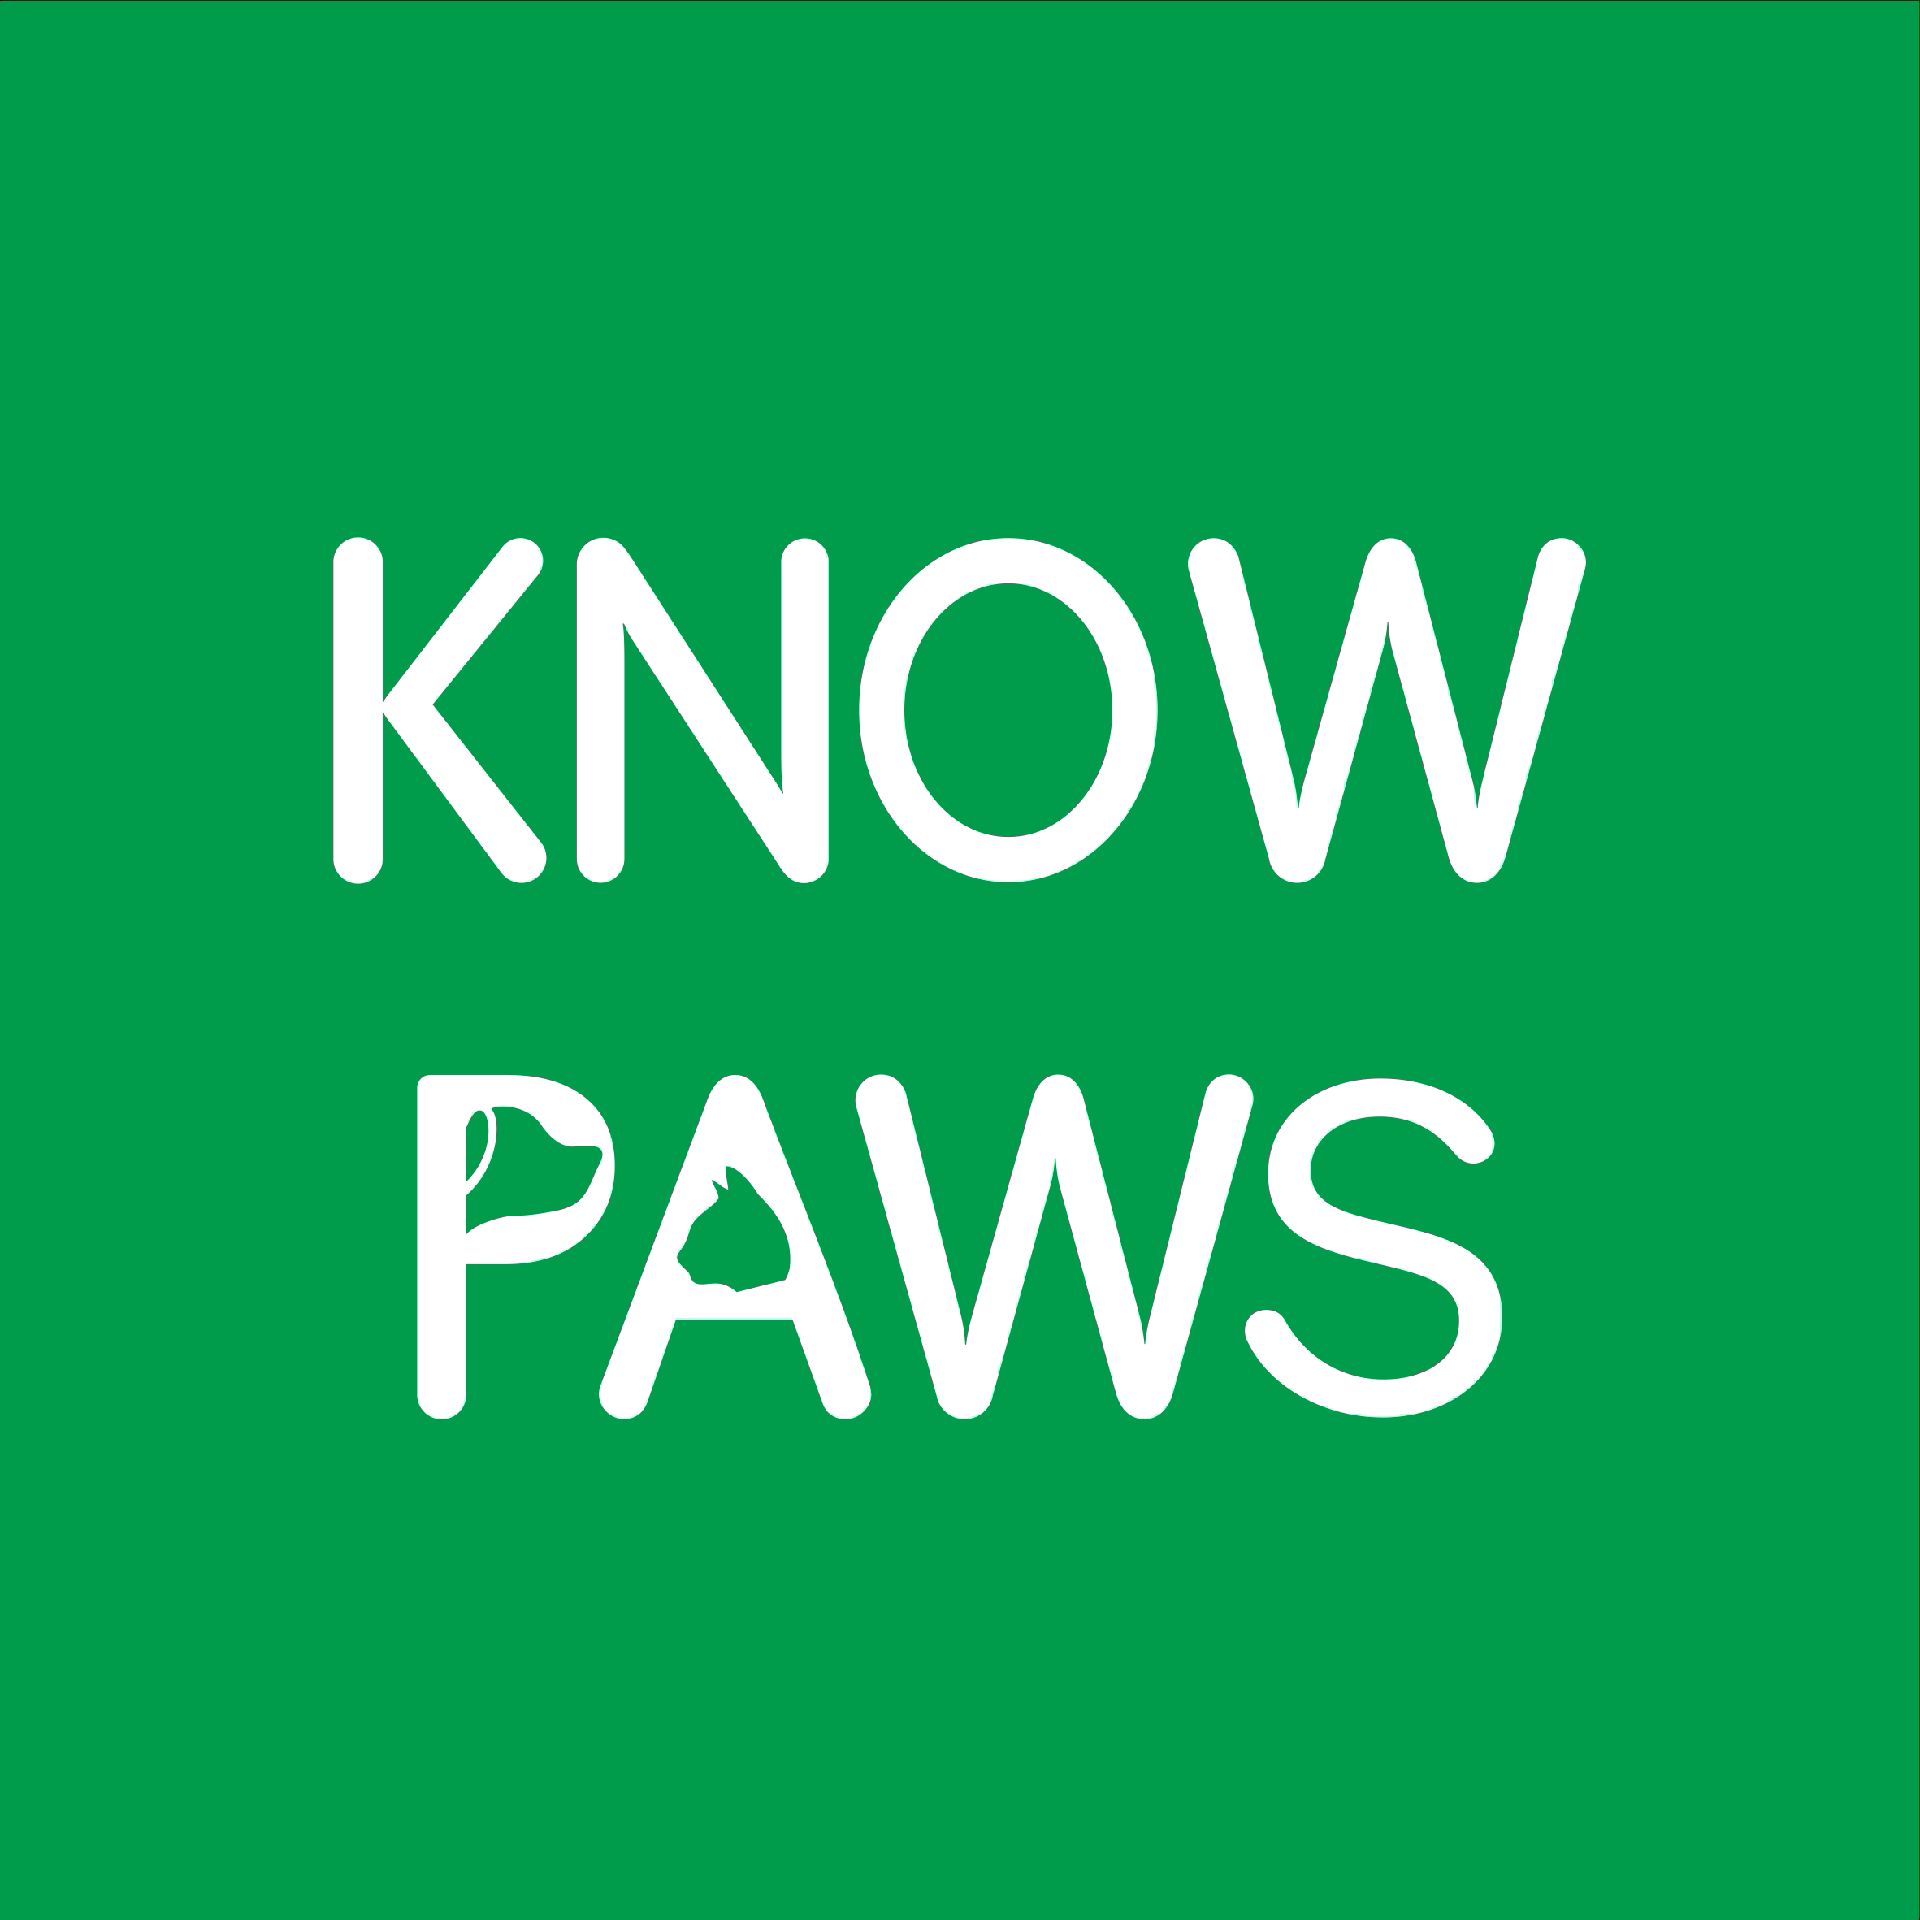 Knowpaws's images